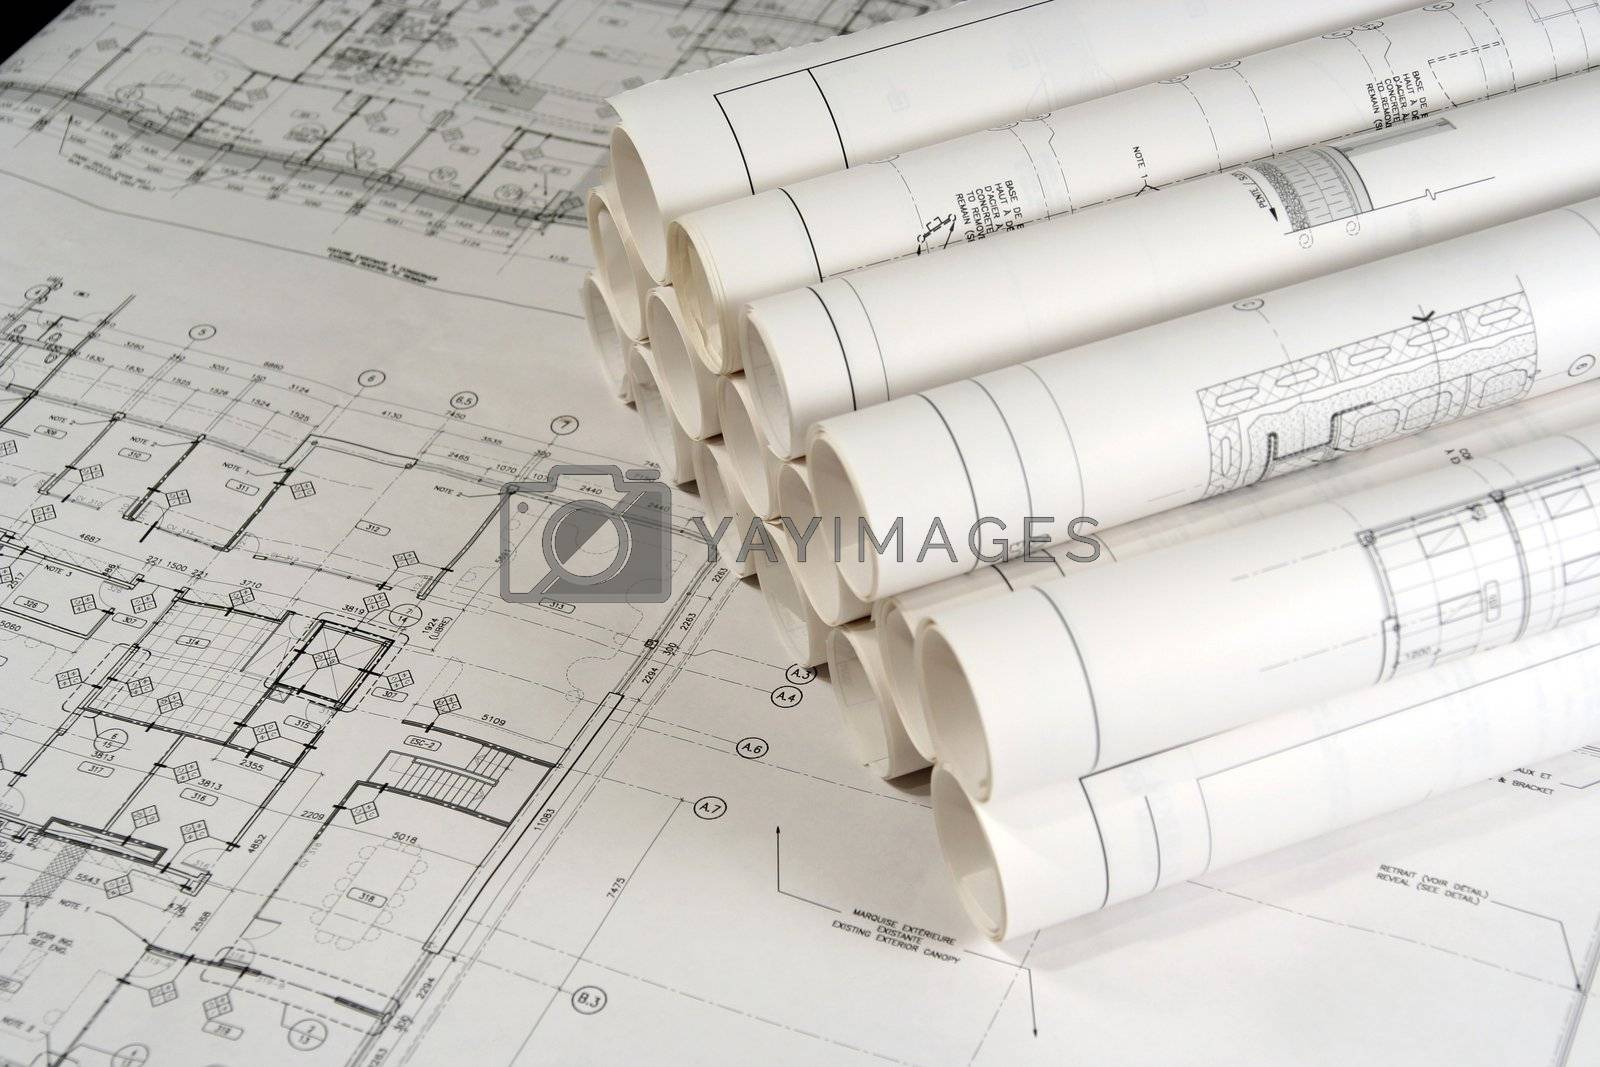 Royalty free image of Engineering and Architecture Drawings 2 by le_cyclope